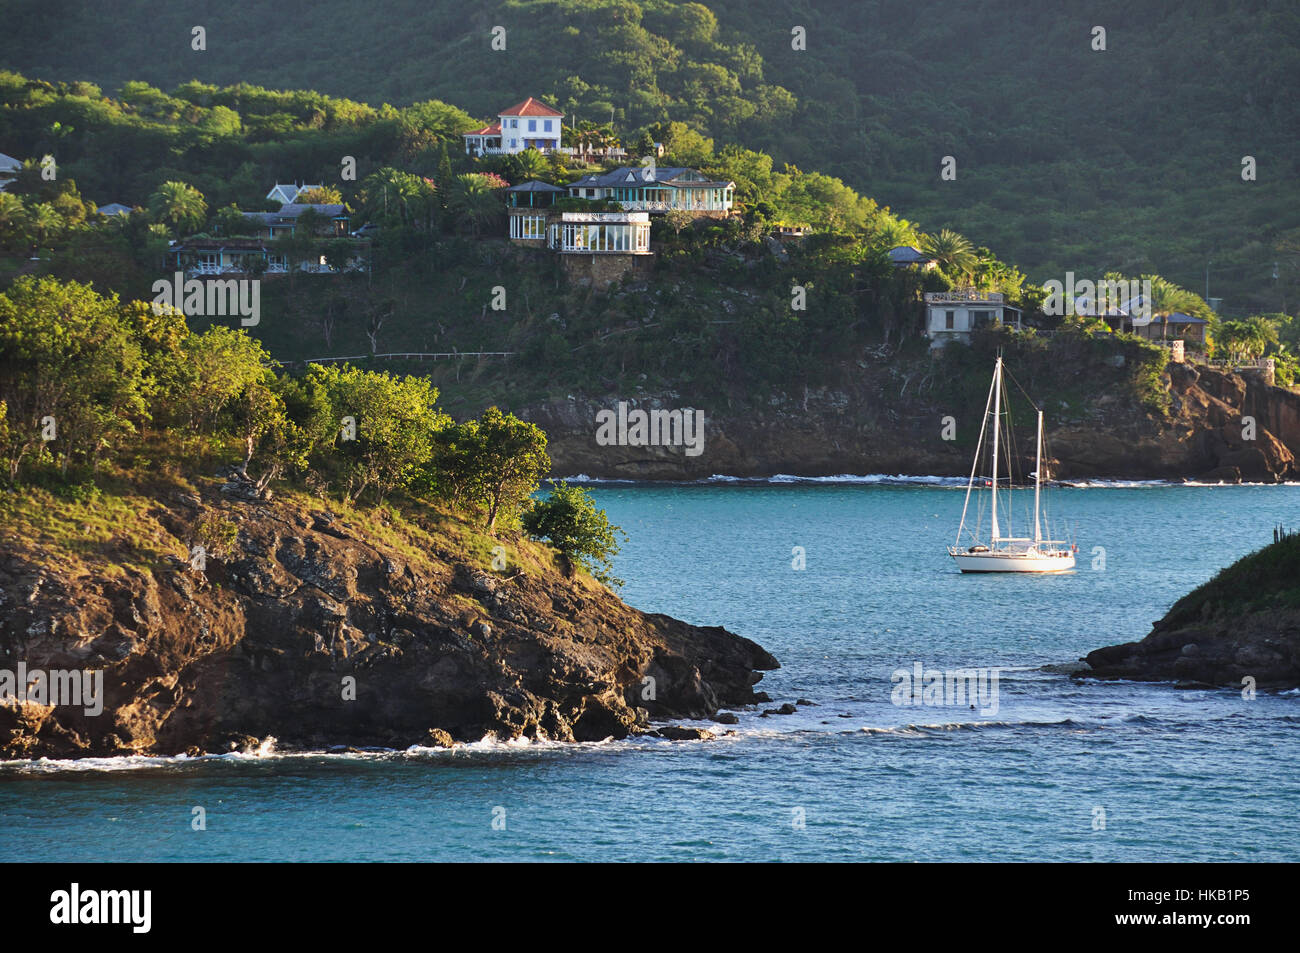 Yacht moving in bay of caribbean sea Stock Photo